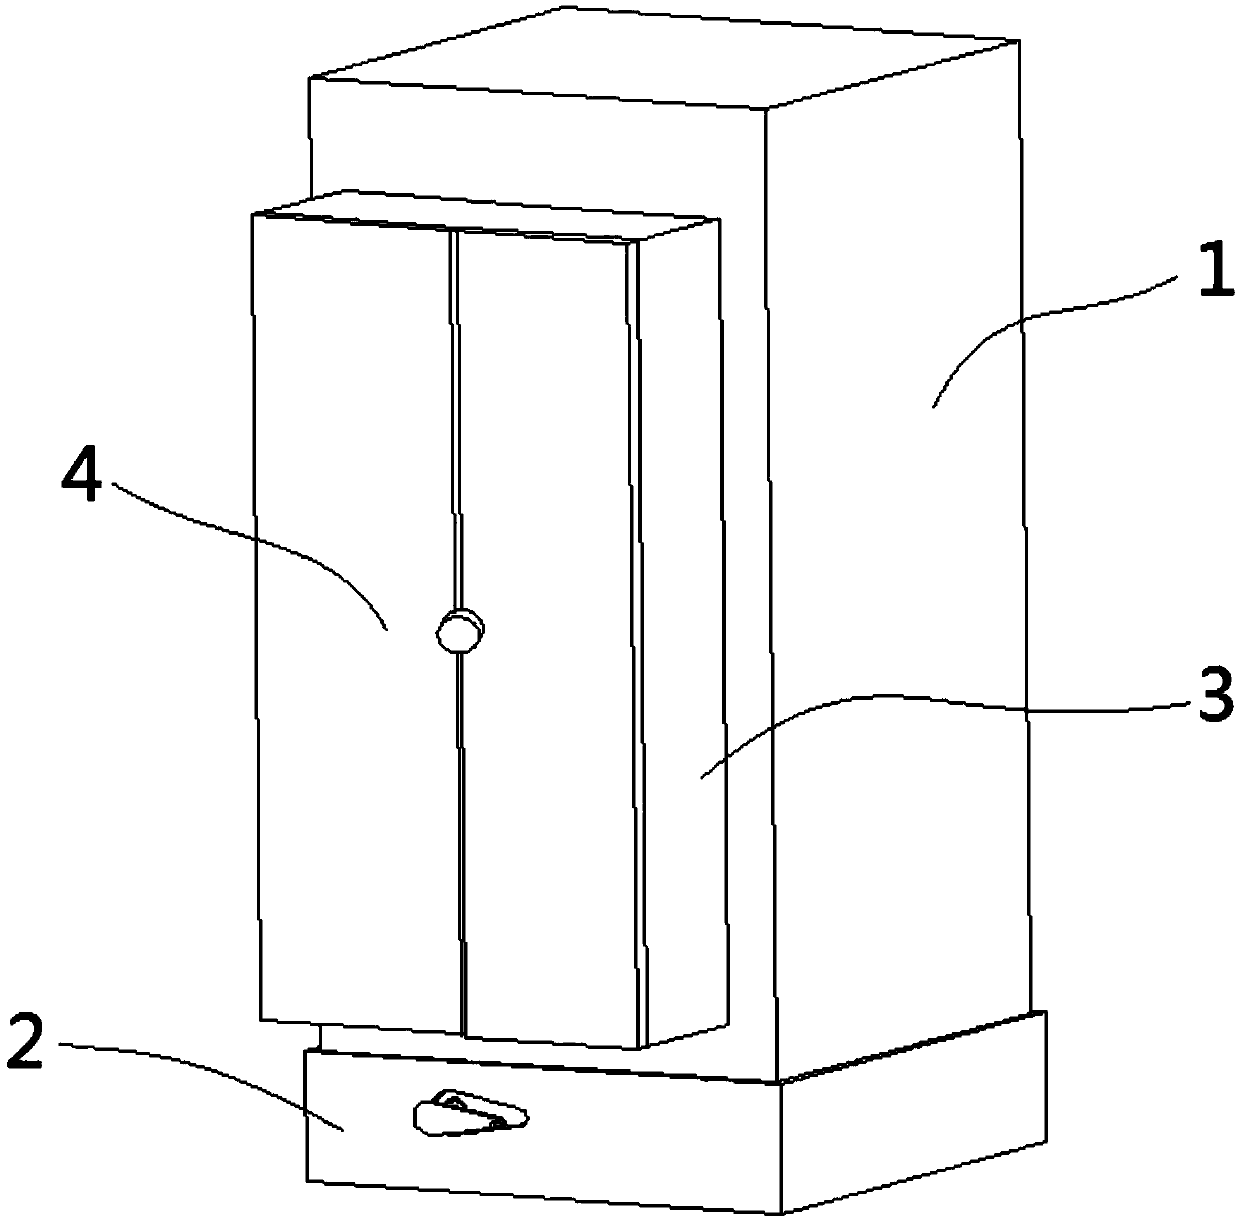 Walking mechanism and electrical box with walking mechanism